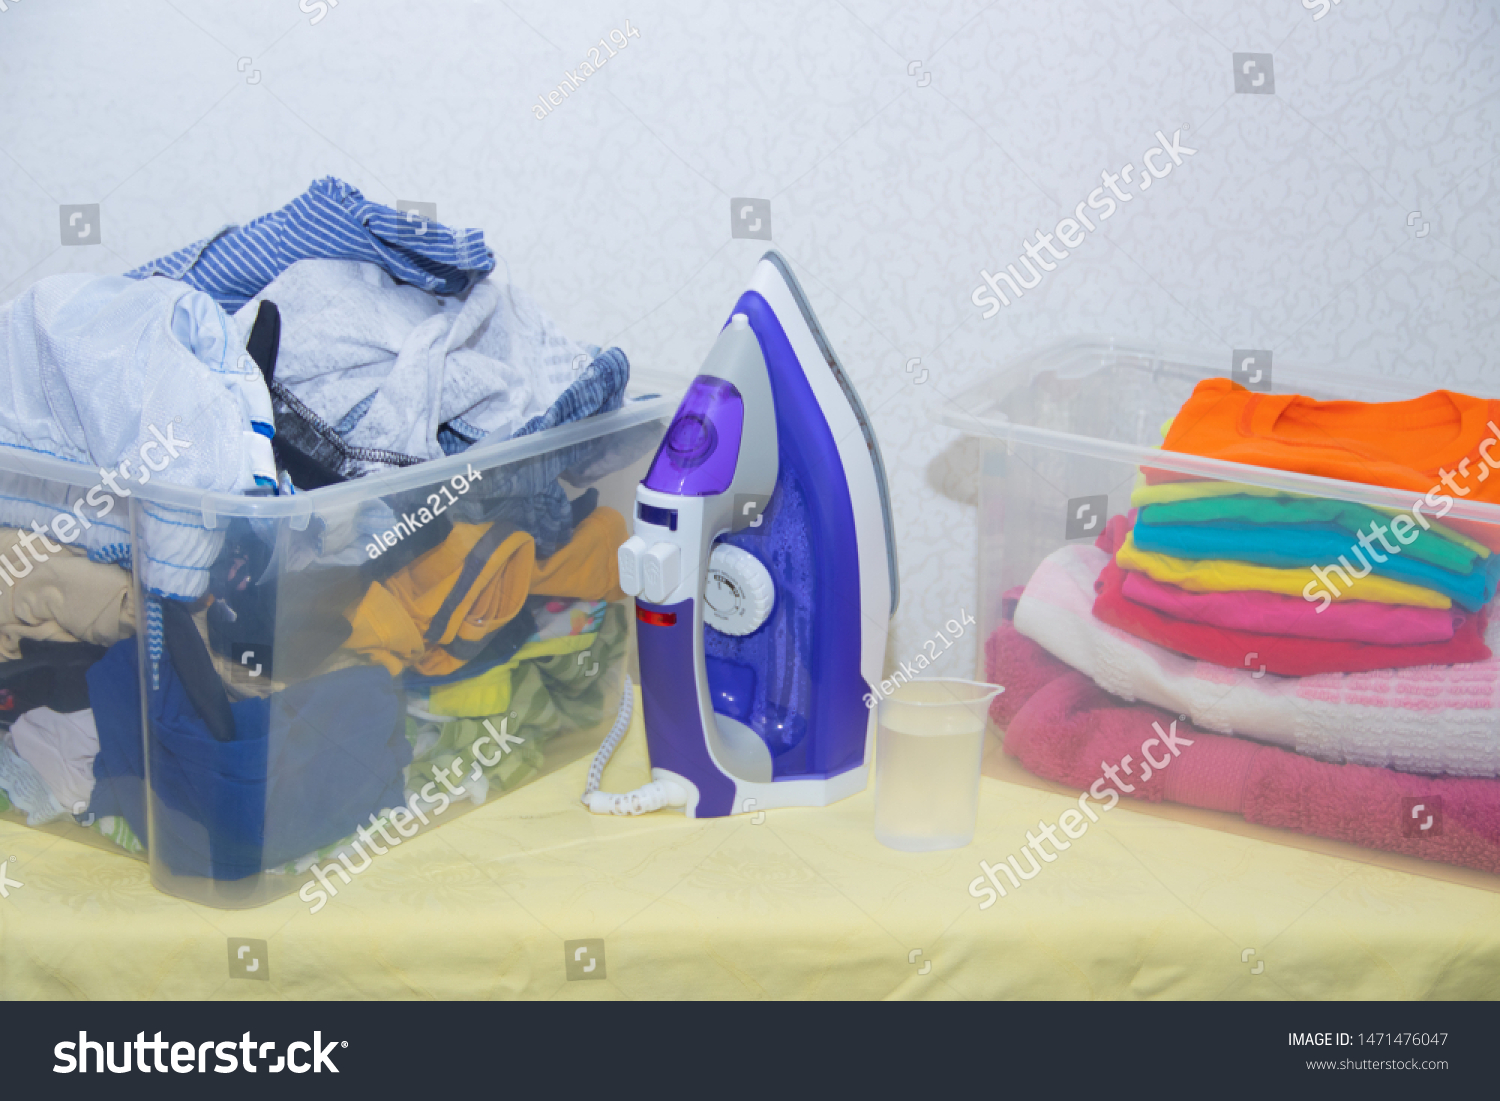 Iron and baby clothes. Colored clothes on an ironing board. Bright t-shirts. Ironed and non-ironed colored children's underwear on the board. Ironing board. A pile of things. #1471476047